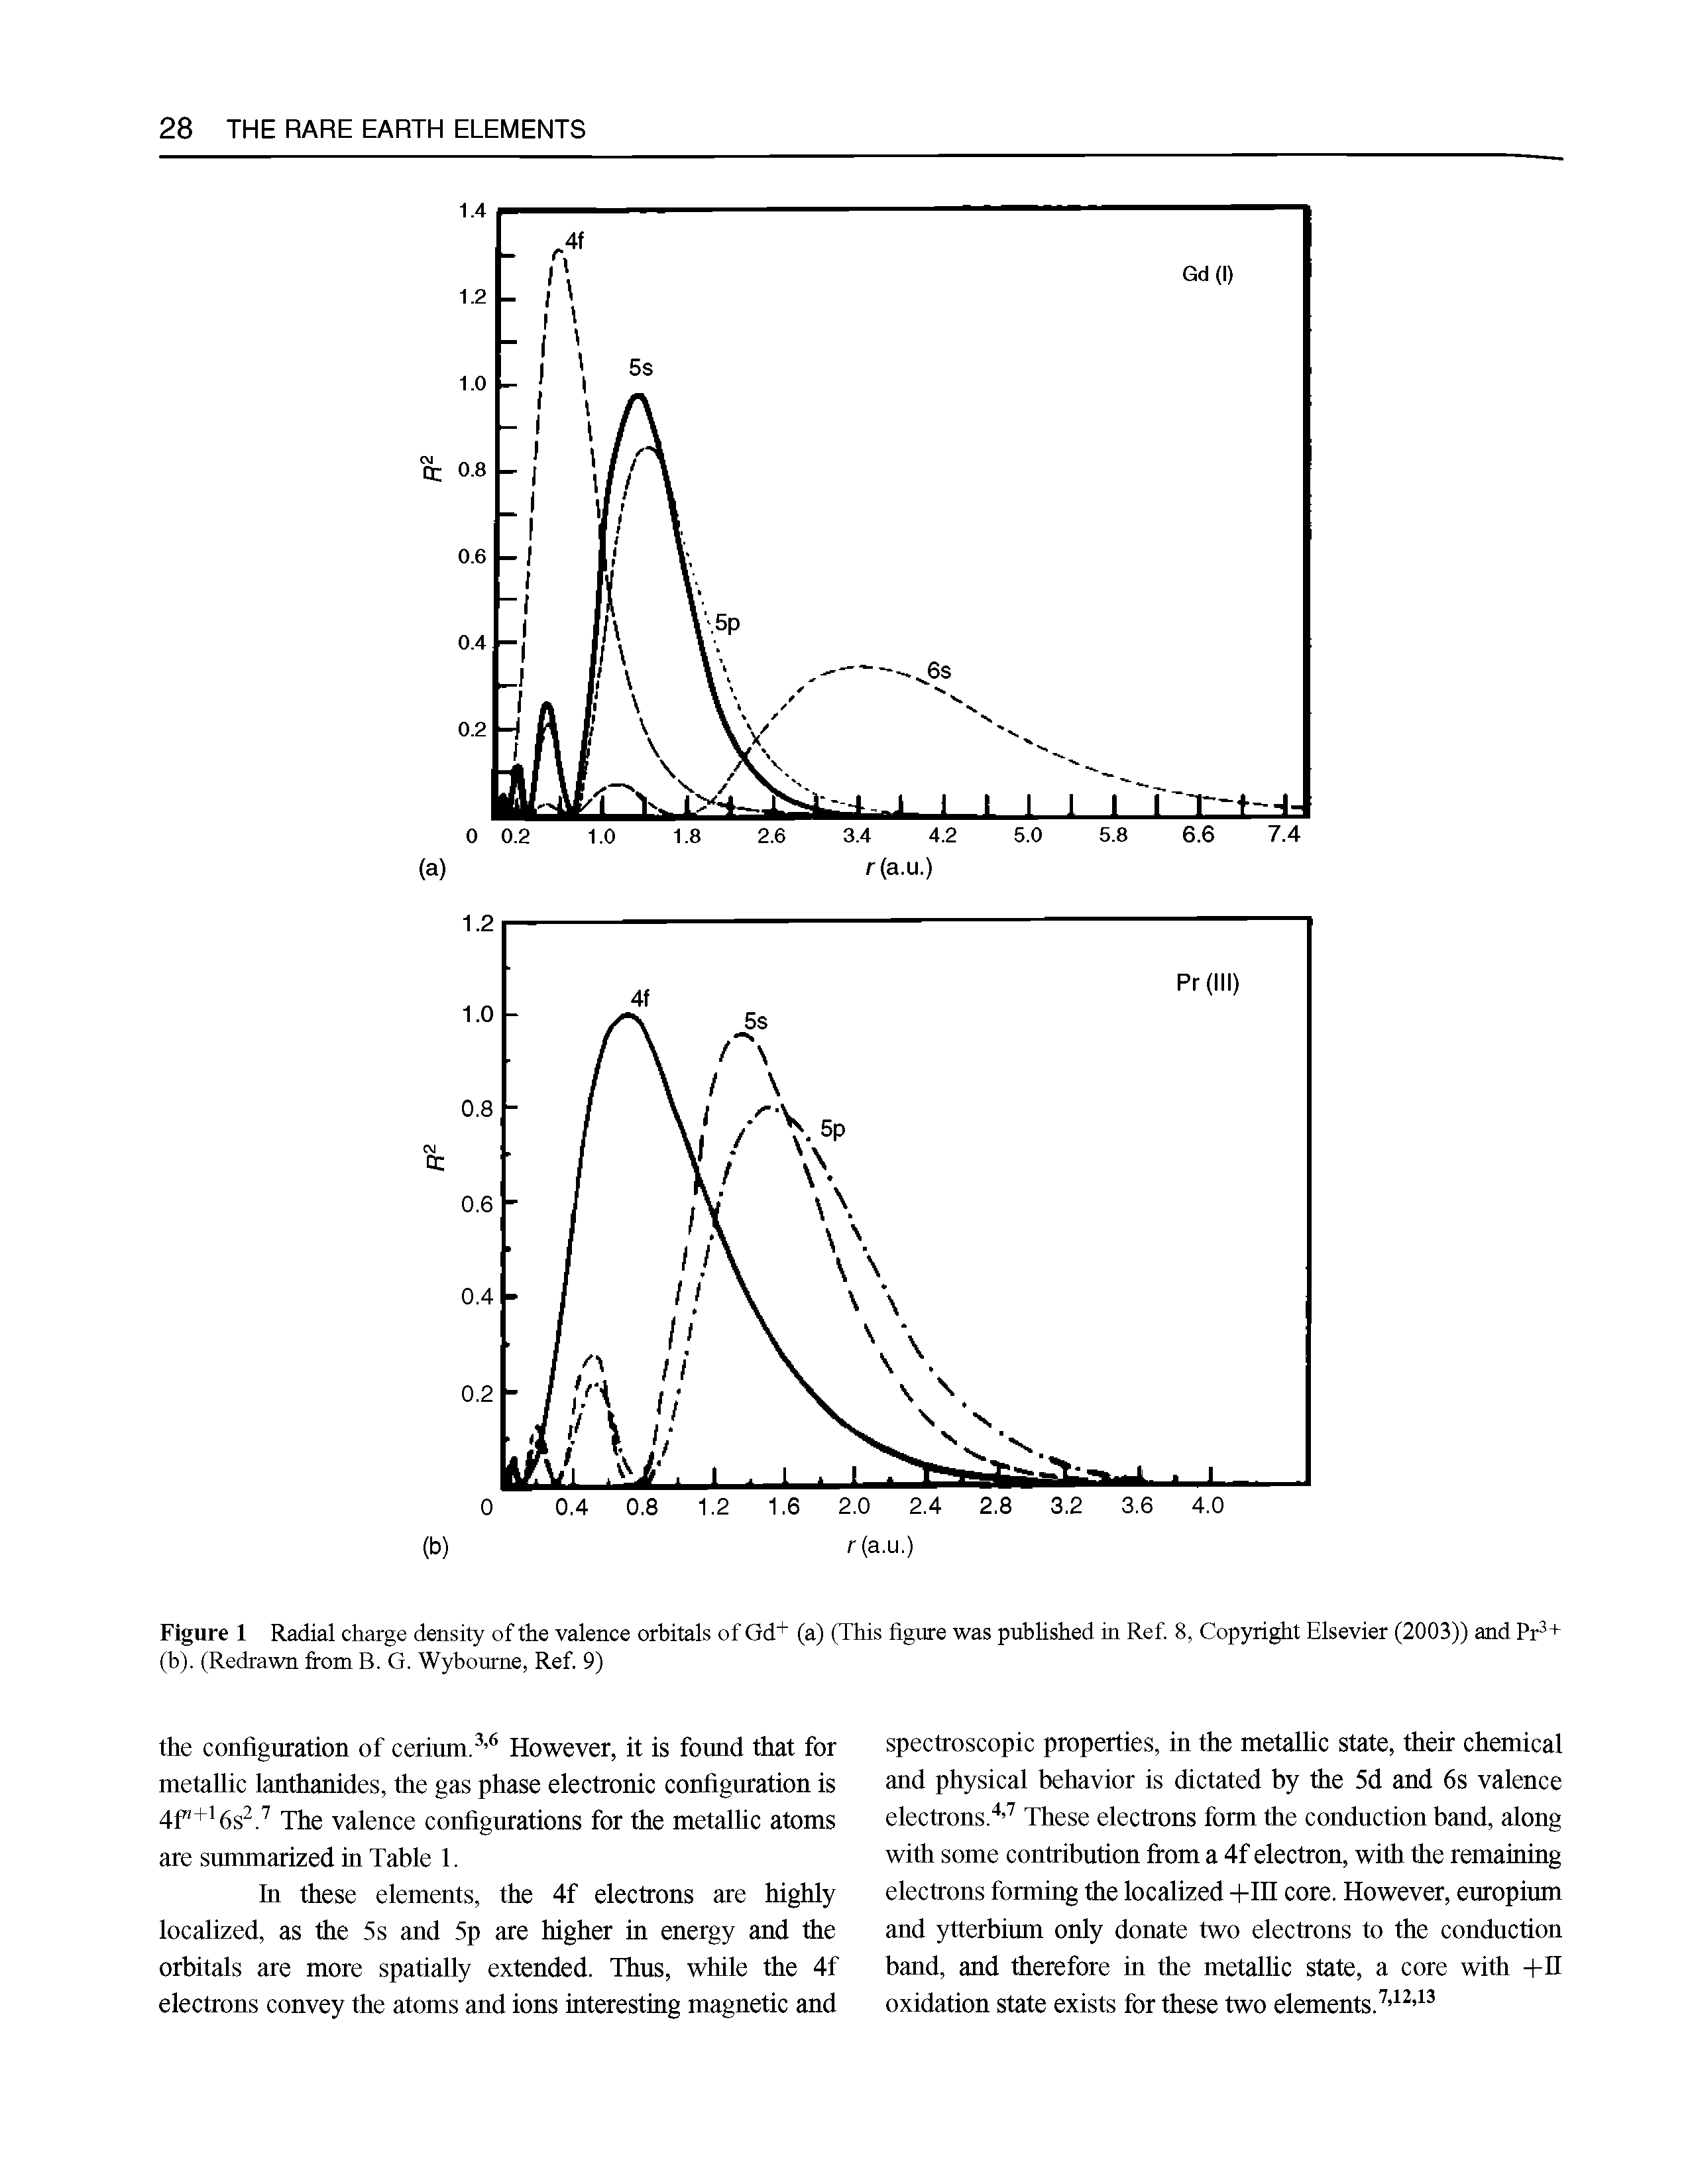 Figure 1 Radial charge density of the valence orhitals of Gd+ (a) (This figure was pubhshed in Ref 8, Copyright Elsevier (2003)) and Pr + (h). (Redrawn fi om B. G. Wyhoume, Ref. 9)...